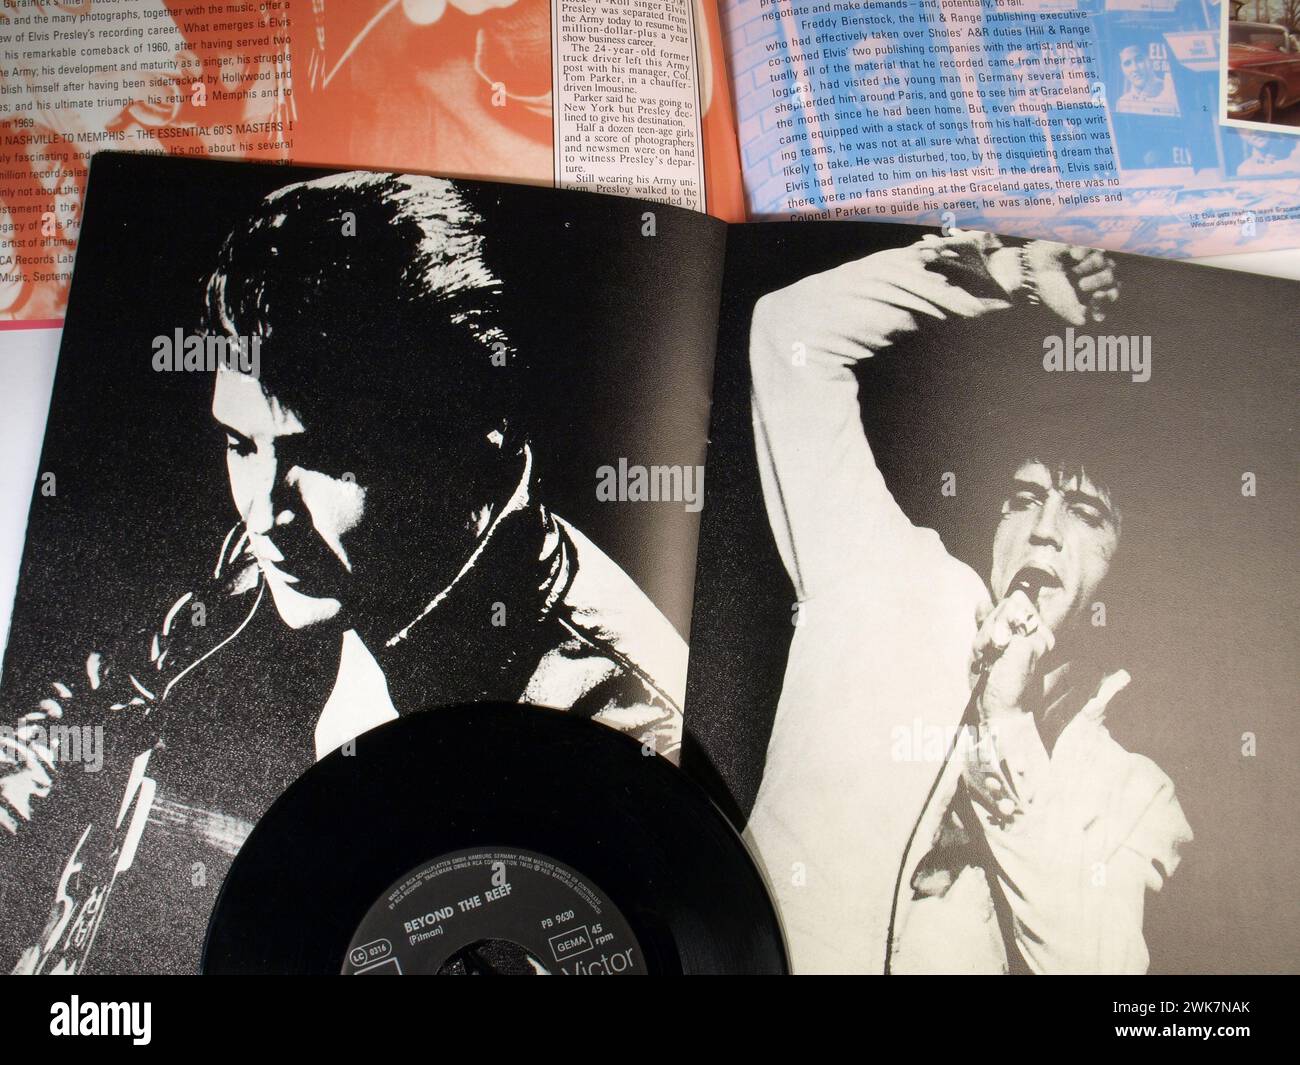 Music Exhibition - Elvis Presley Single HIT Vinyl Record with Pictures; King of Rock and Roll Stock Photo